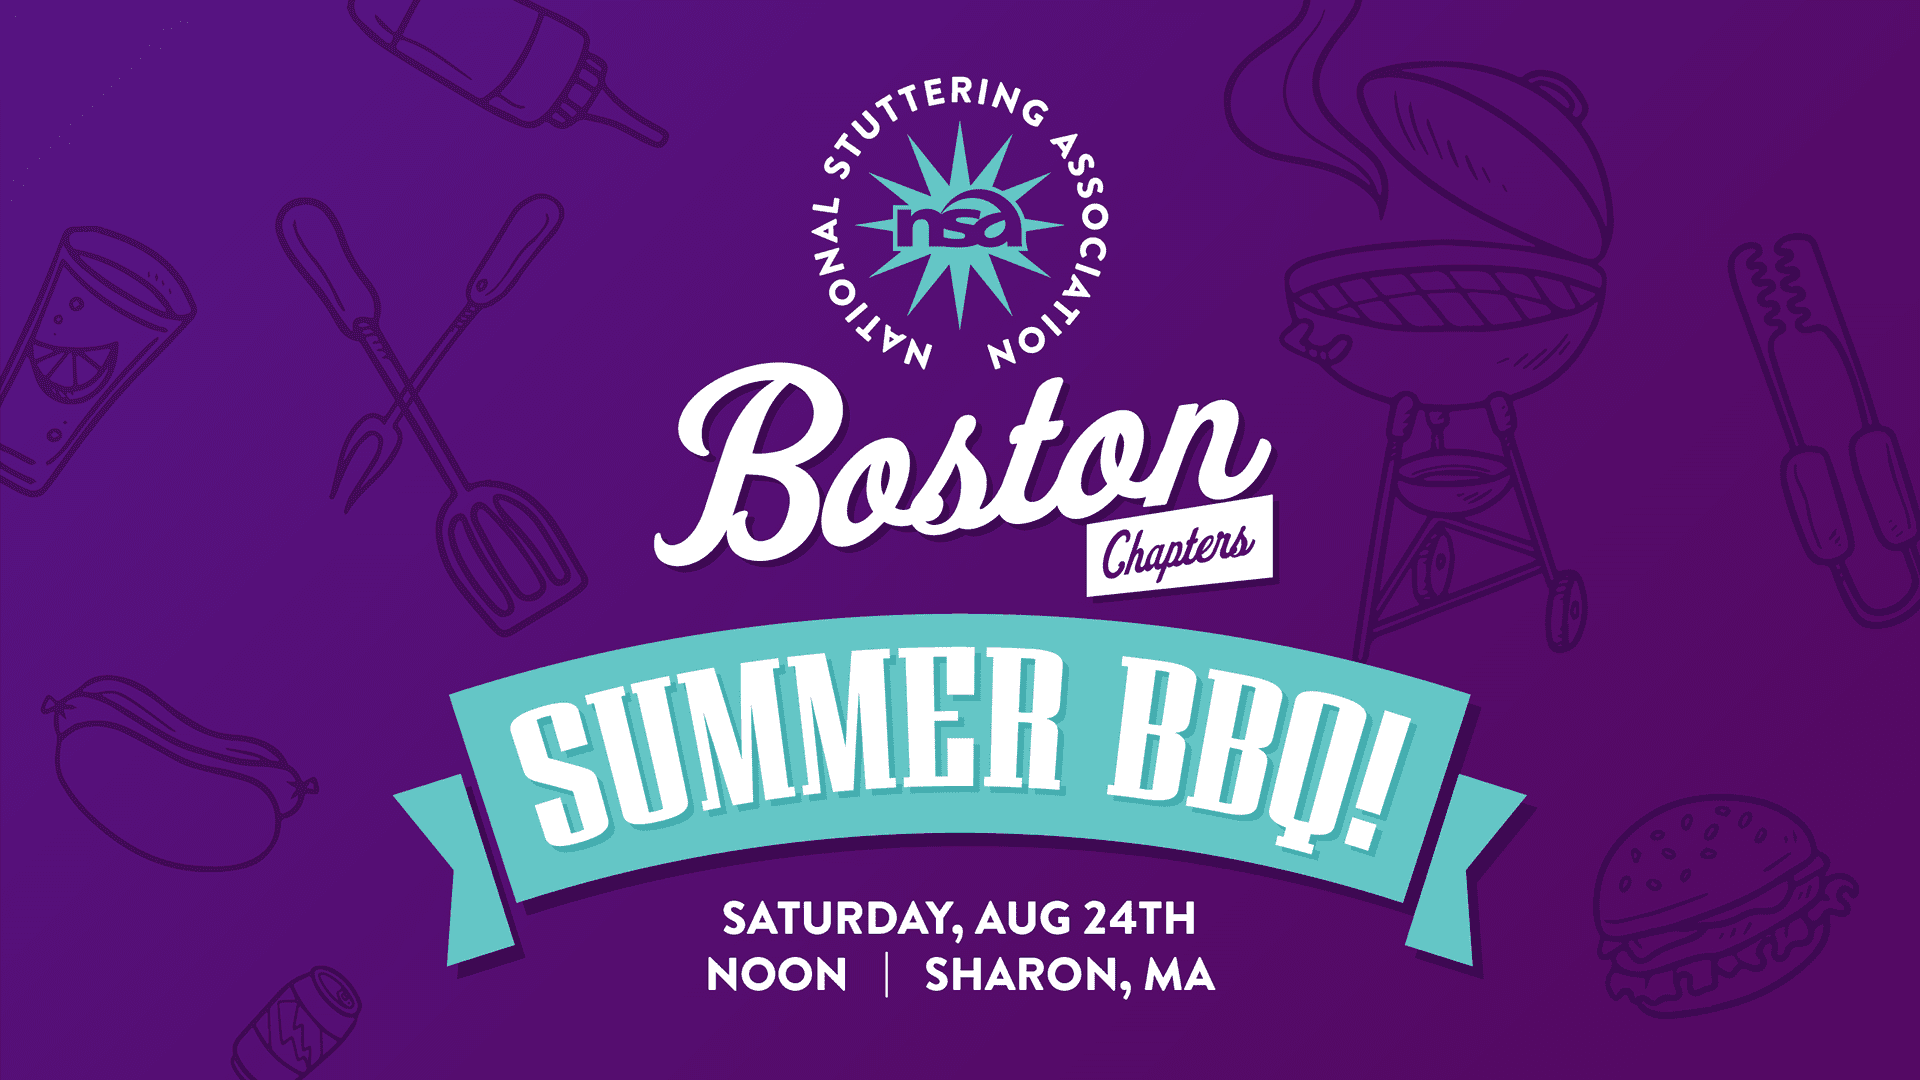 Promotional banner for the National Stuttering Association Boston Chapters' Summer BBQ. The event is on Saturday, August 24th, at noon in Sharon, MA. The purple background features illustrations of a hot dog, utensils, a grill, a bottle, and a burger.